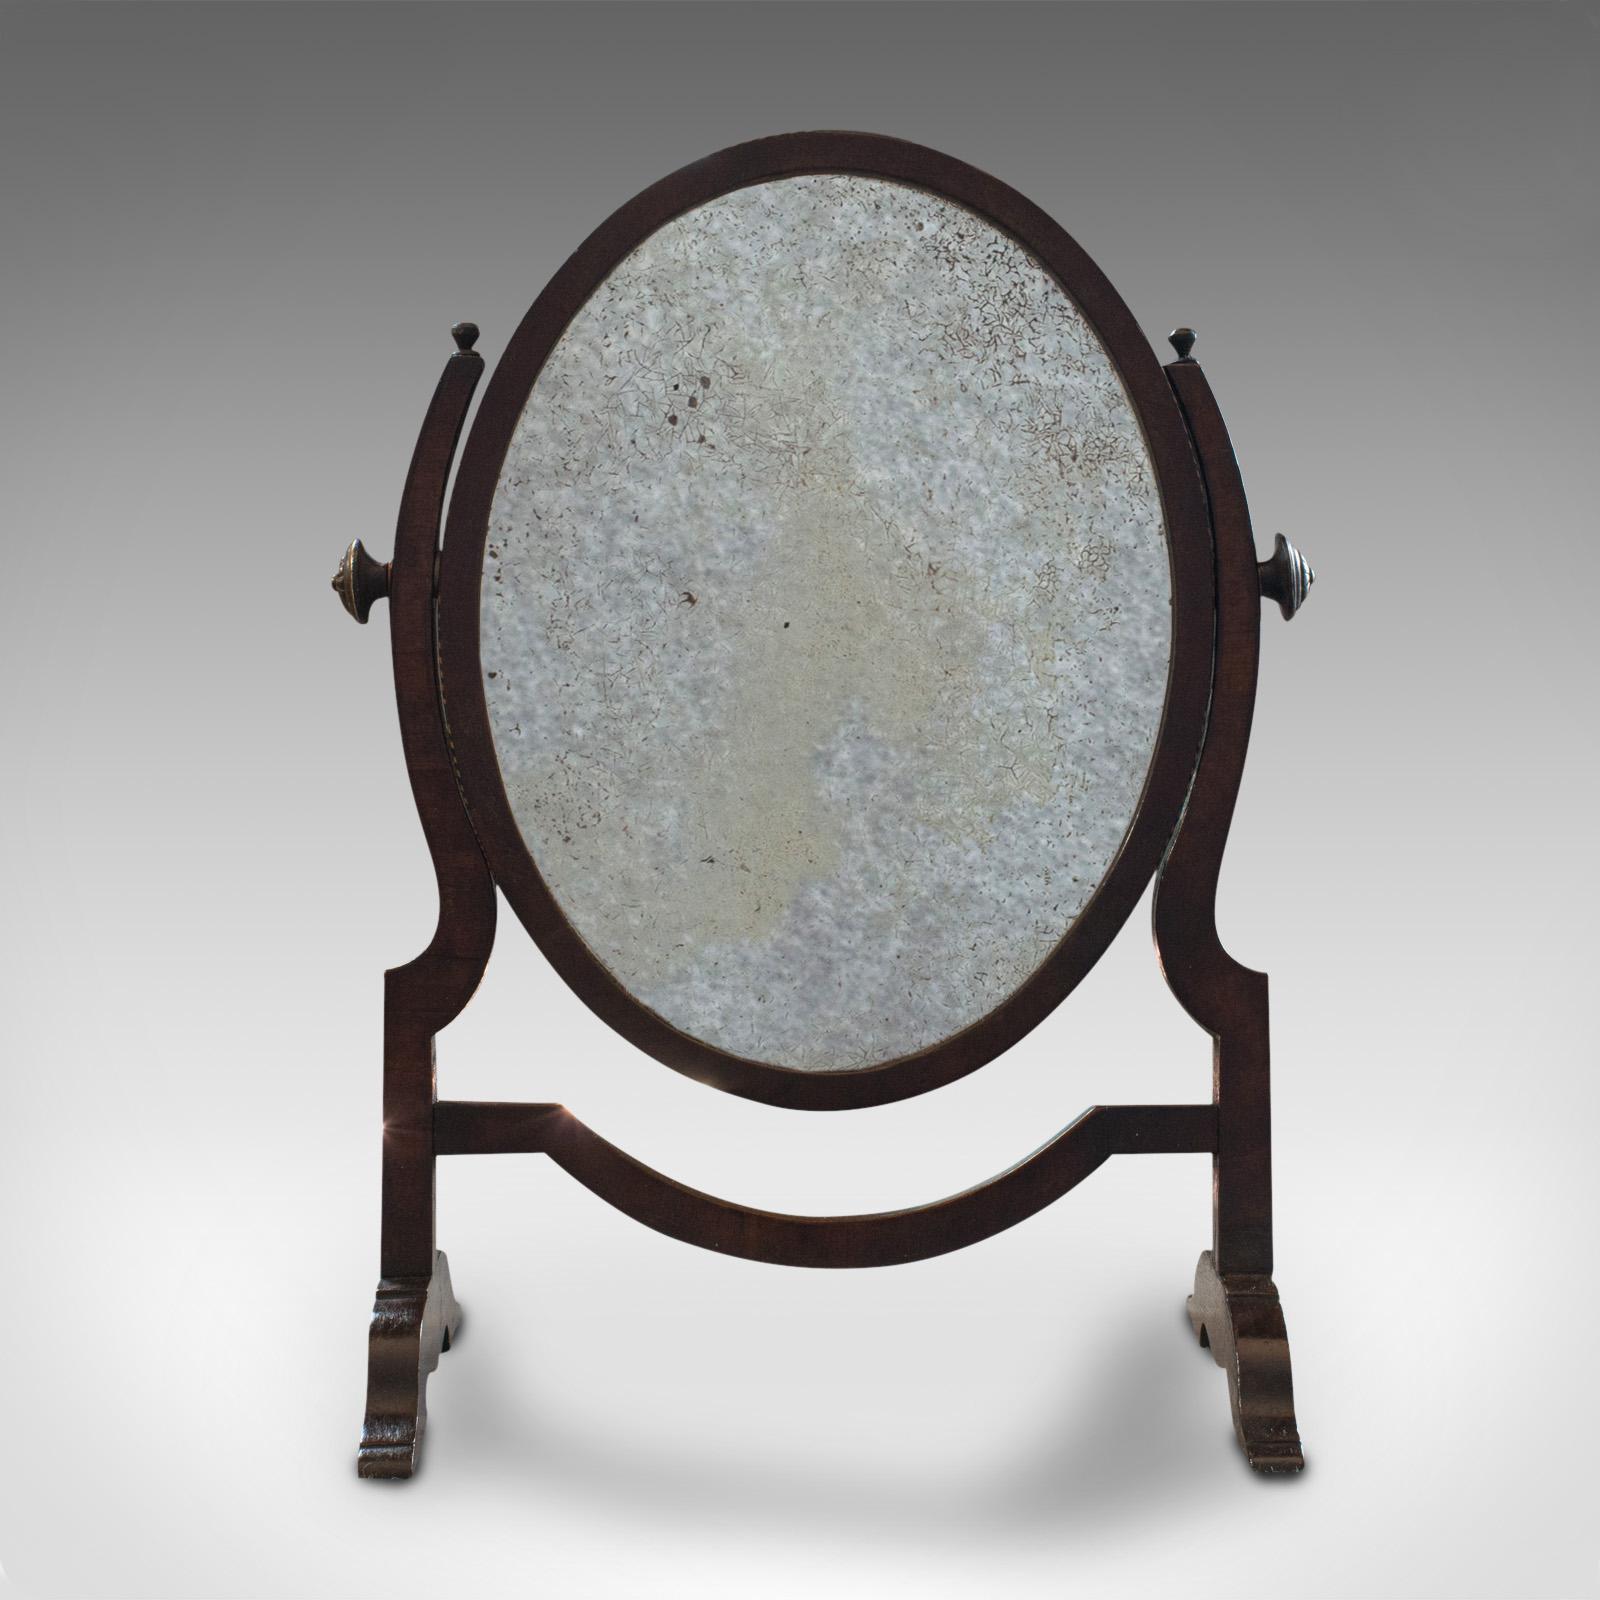 This is an antique vanity mirror. An English, oak and mahogany dresser mirror, dating to the Regency period, circa 1820.

Pleasingly distressed mirror
Displays a desirable aged patina
Oak frame with mahogany detail
Original plate glass shows